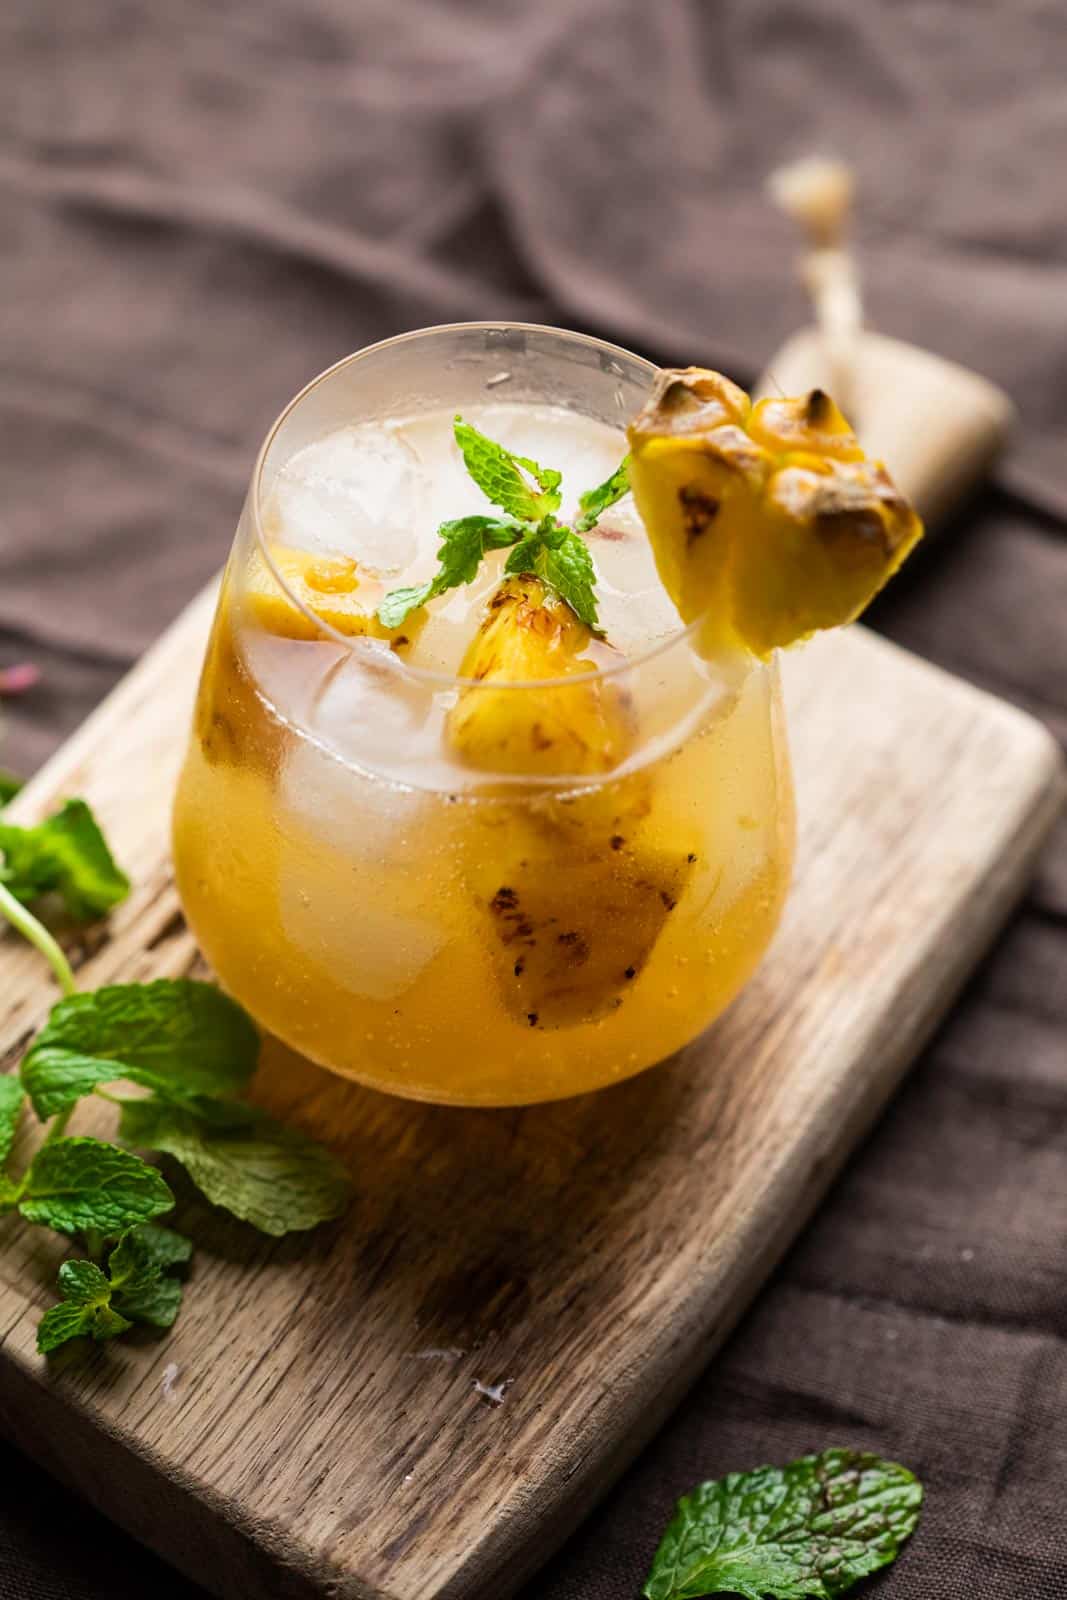 roasted pineapple moscow mule is a stemless wine glass with sprigs of mint